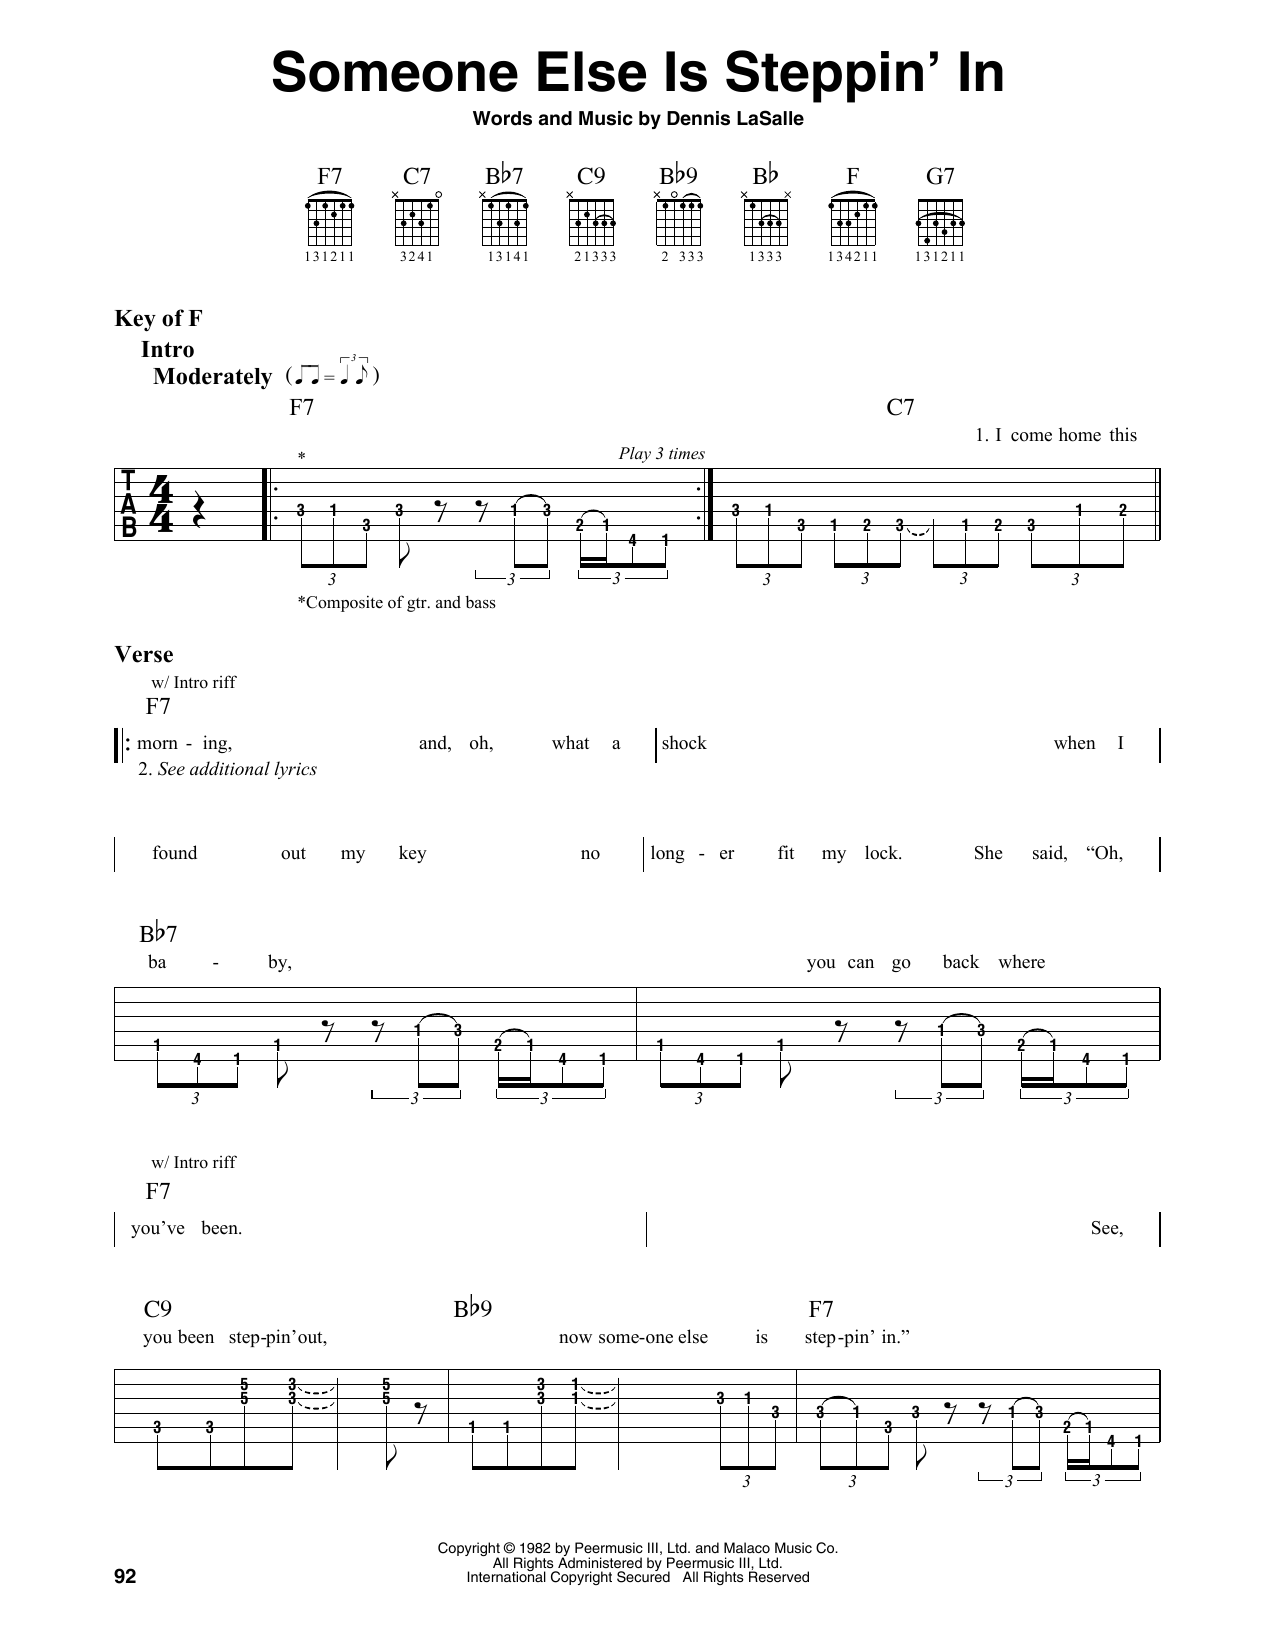 Download Buddy Guy Someone Else Is Steppin' In Sheet Music